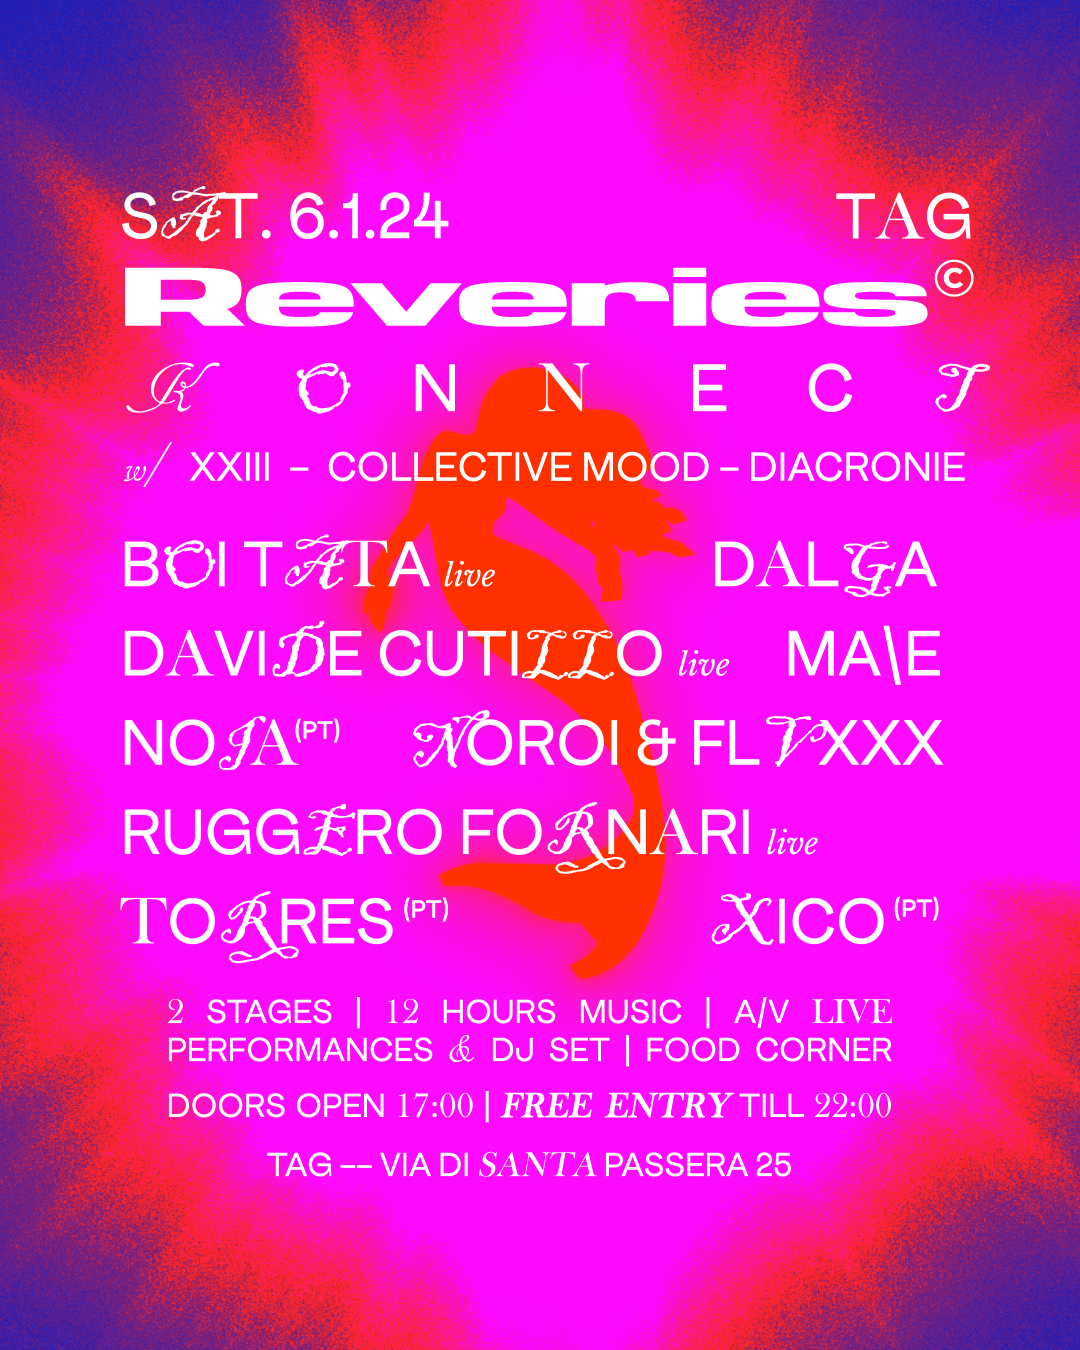 Reveries: Konnect with XXIII, Collective Mood, Diacronie - フライヤー裏